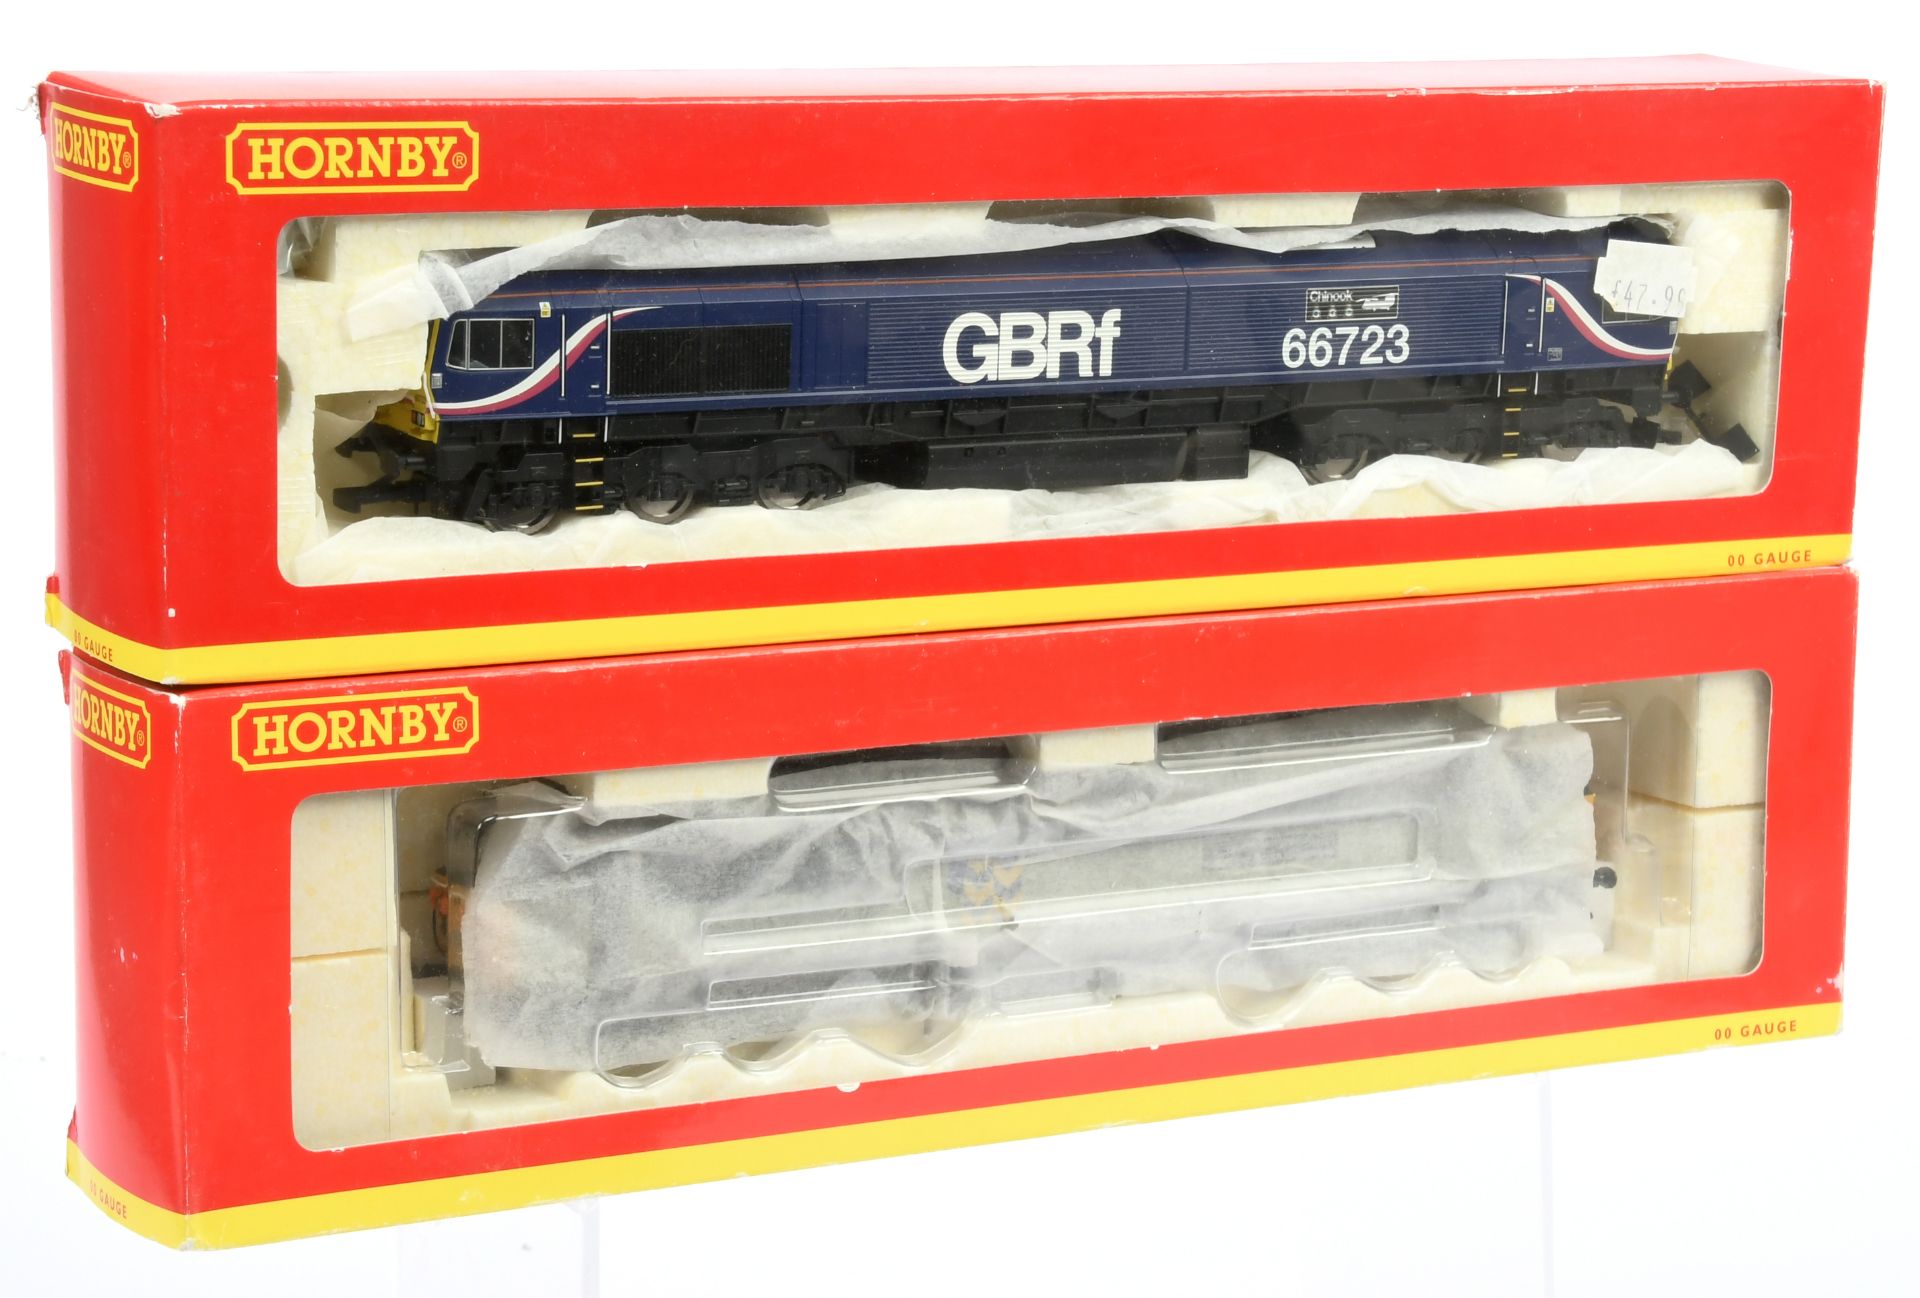 Hornby (China) pair of Diesel and Electric Locomotives 